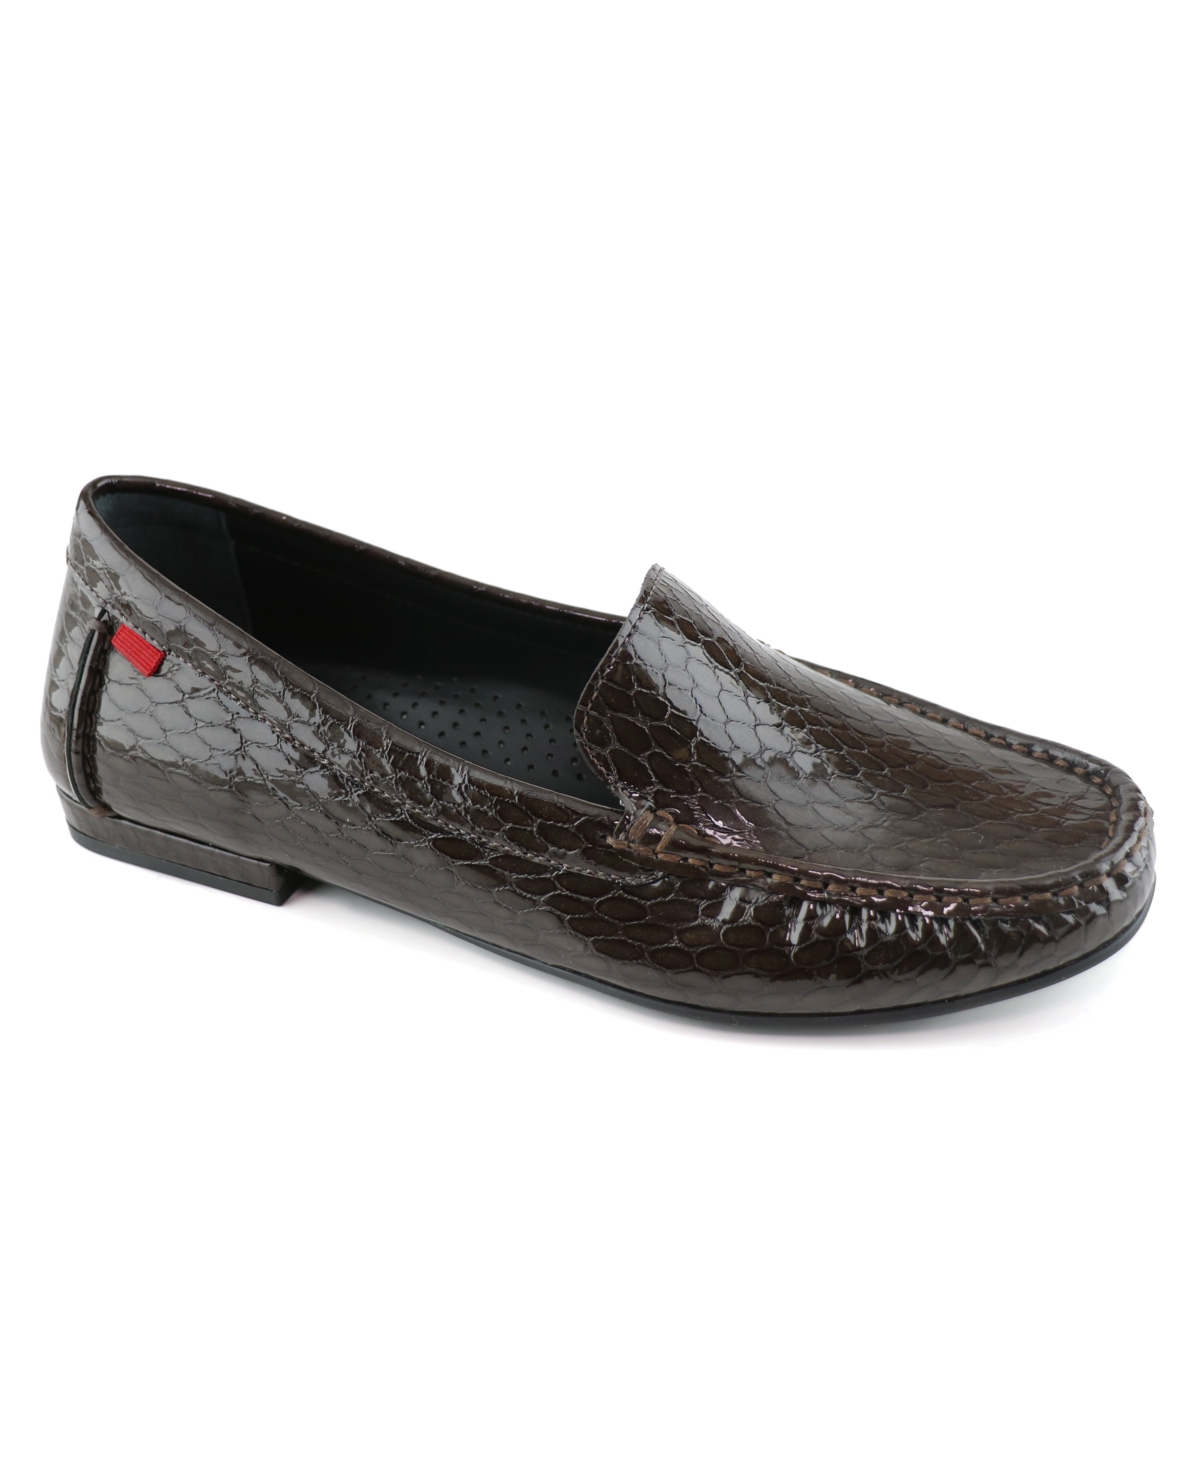 Amsterdam Women's Loafer Shoes - Cafe Croco Patent